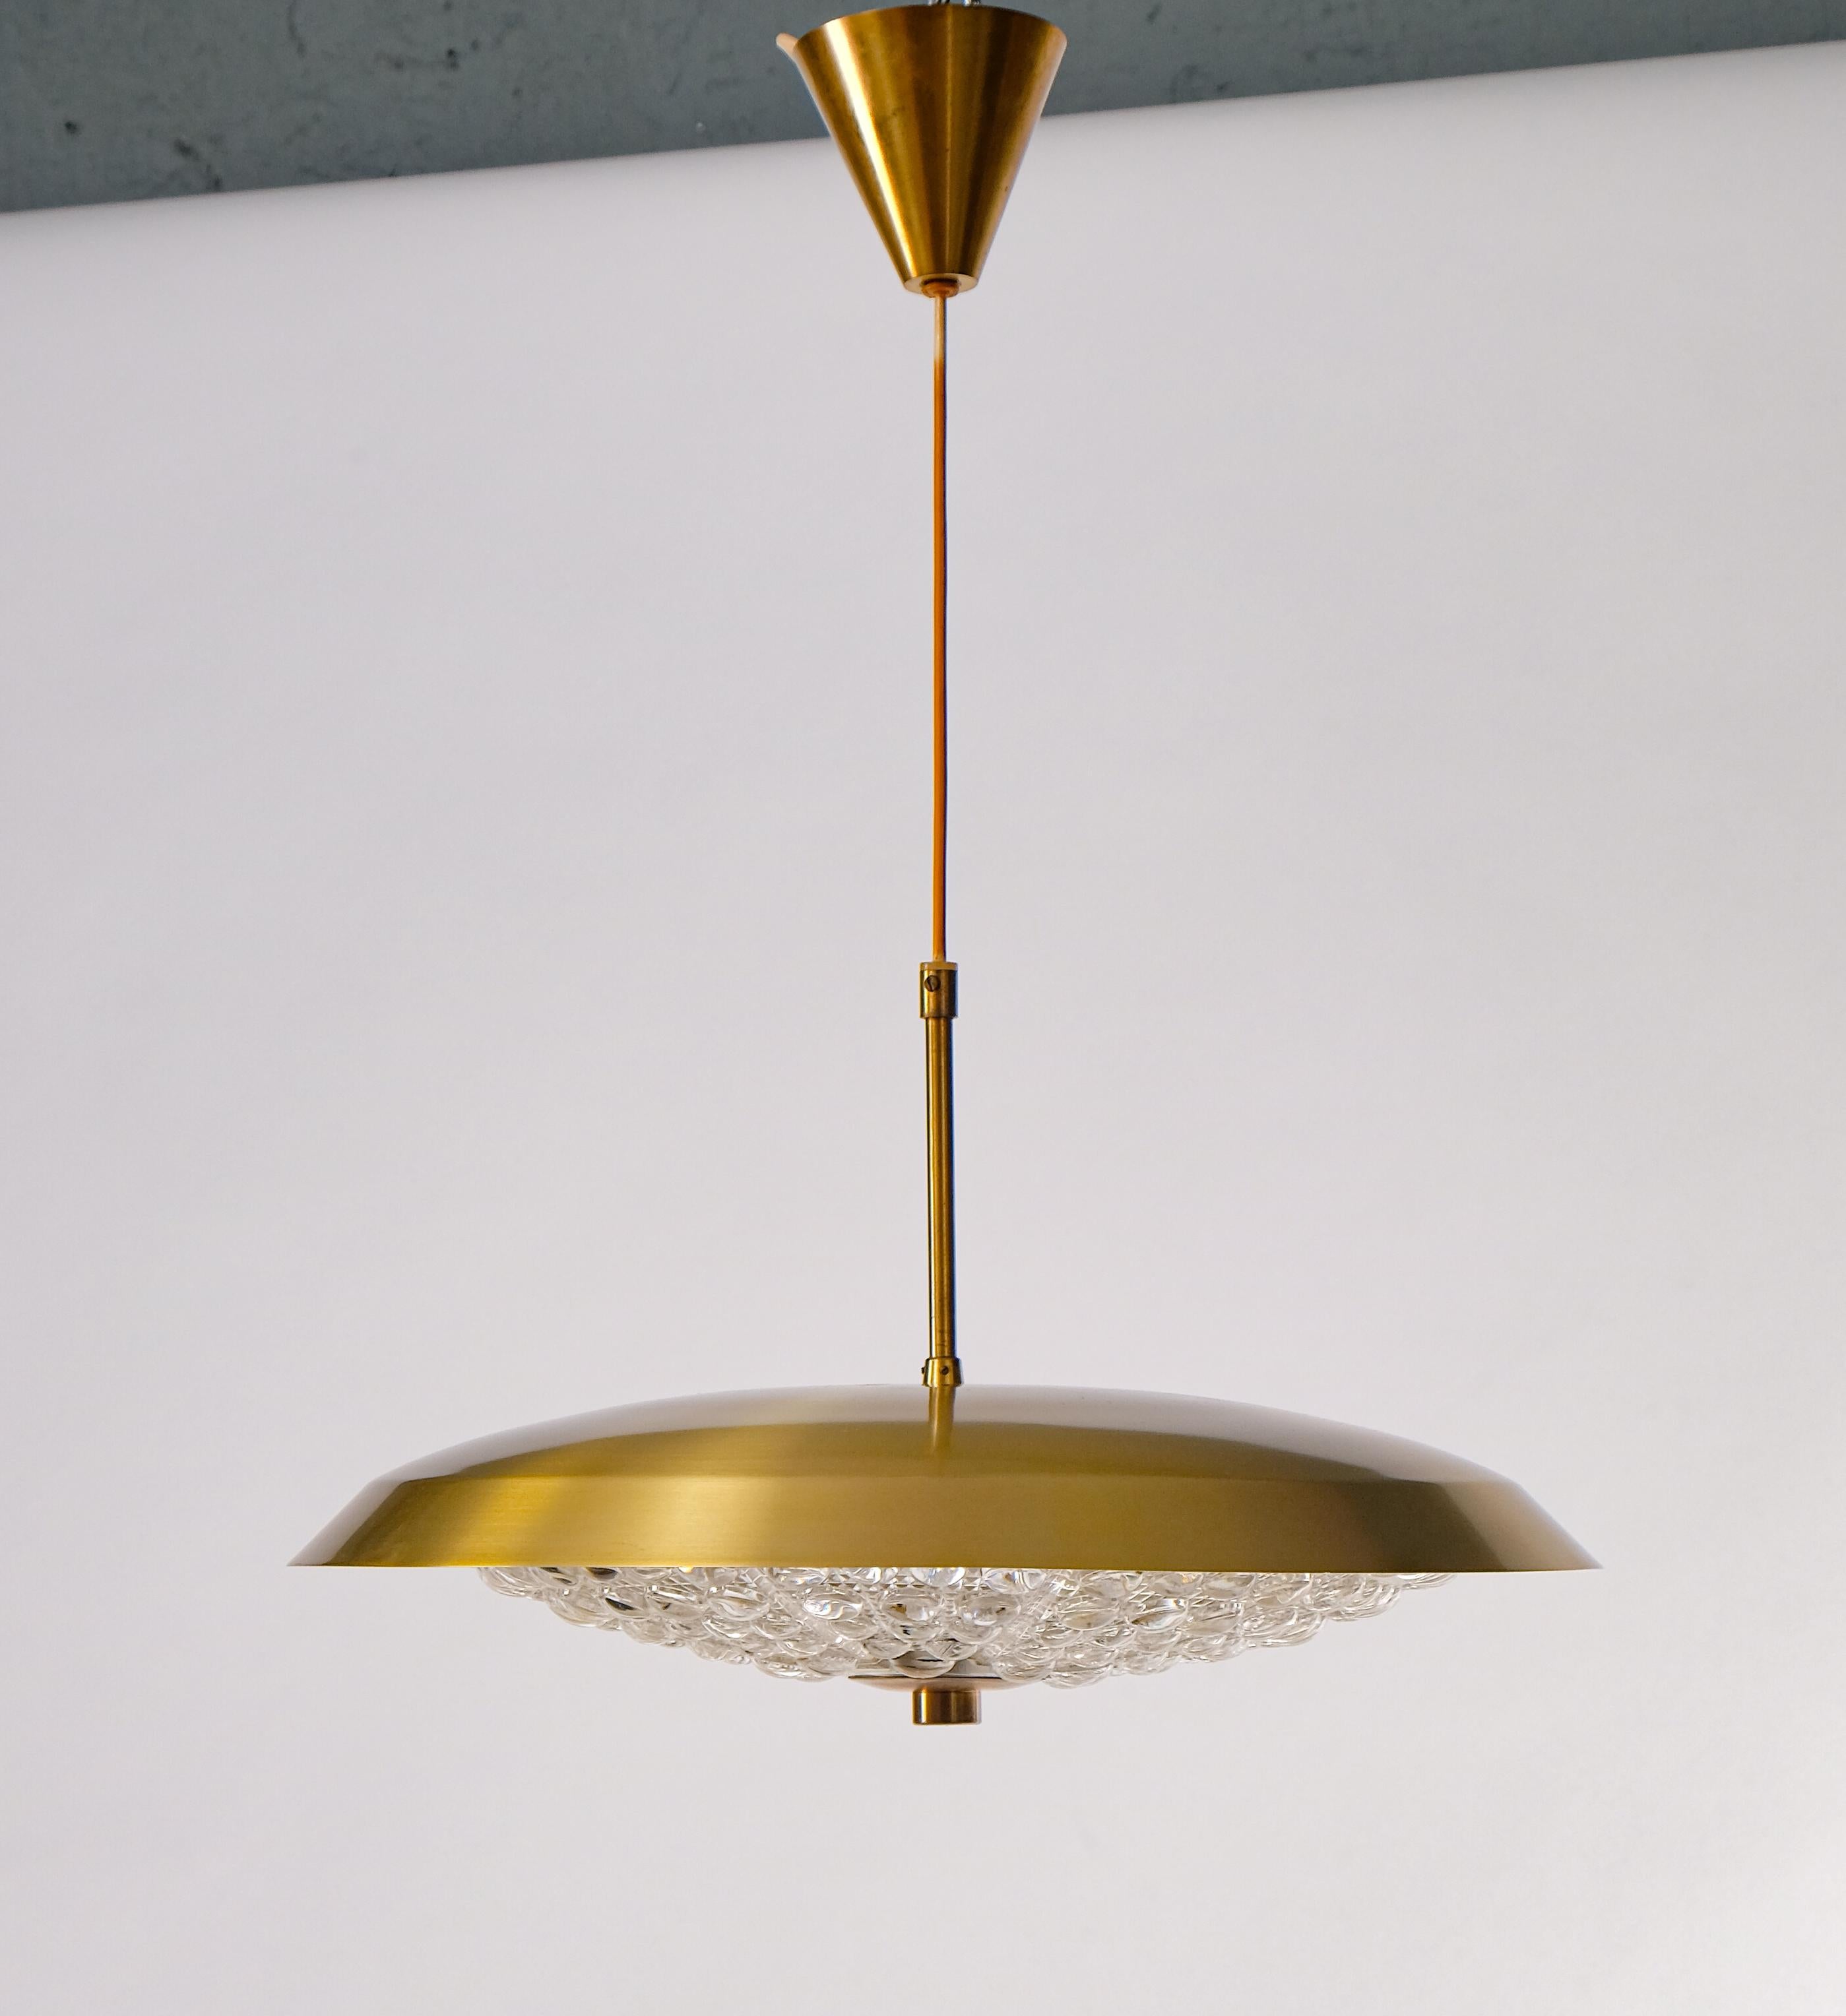 Swedish glass and brass pendant designed by Carl Fagerlund for Orrefors, 1960s.
Diameter: 50 cm 
Height is adjustable.

